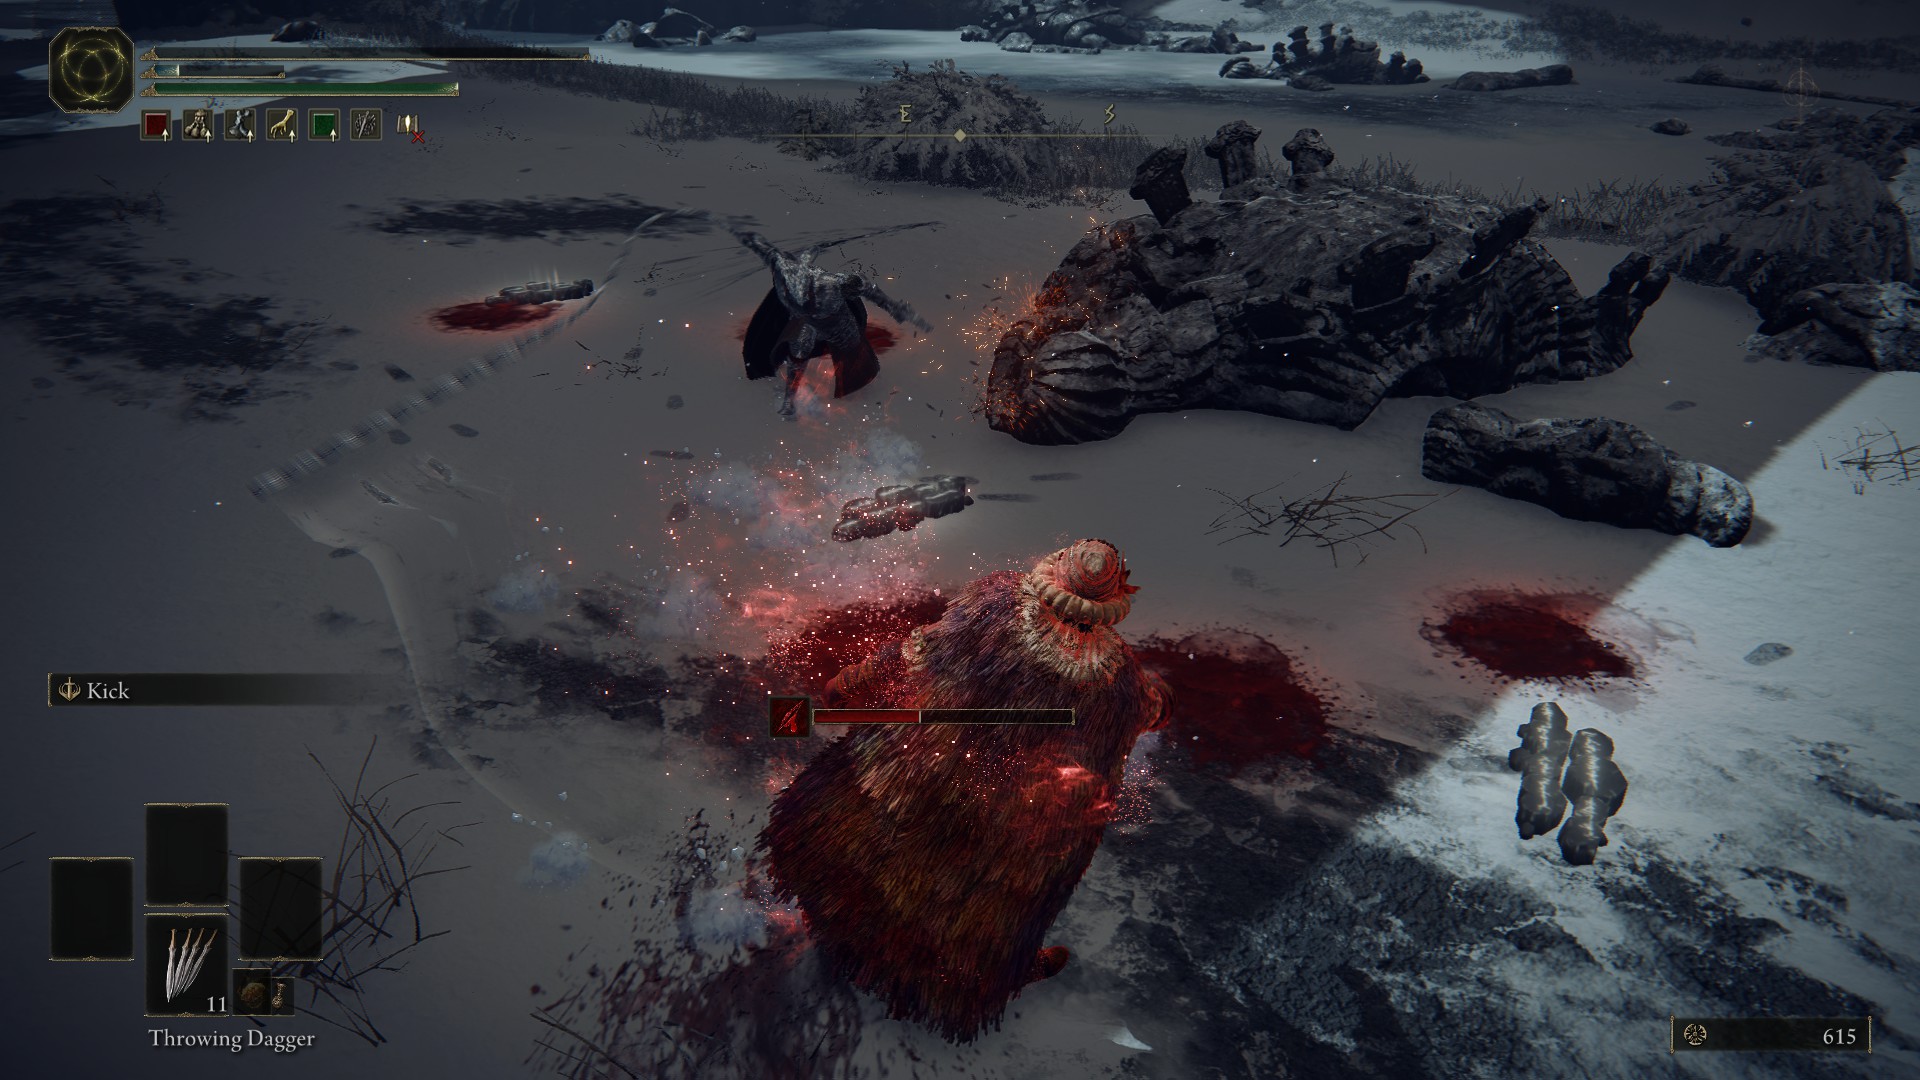 Screenshot from Elden Ring: the player character is defeated by Juno Hoslow, Knight of Blood.